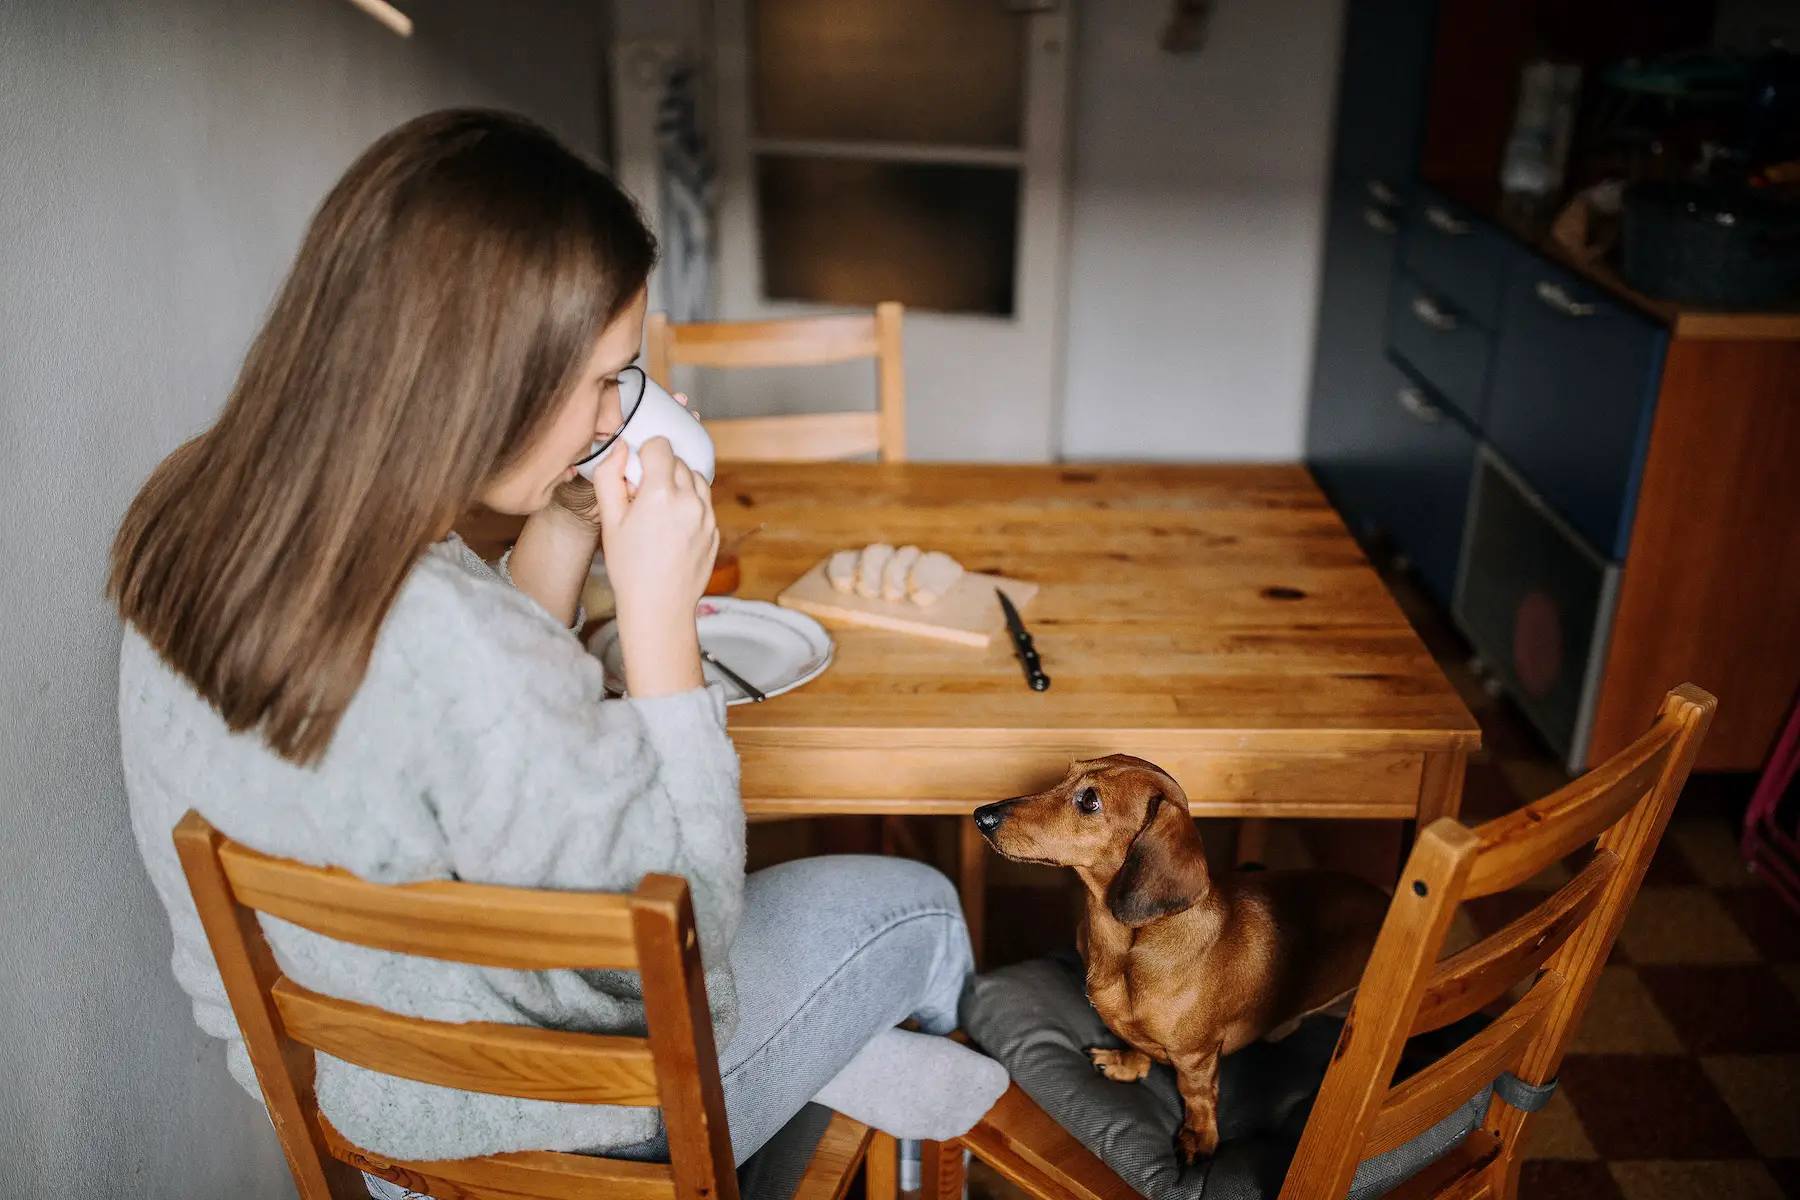 A woman is drinking coffee at the kitchen table, while her dachshund sits watching on the chair next to her.